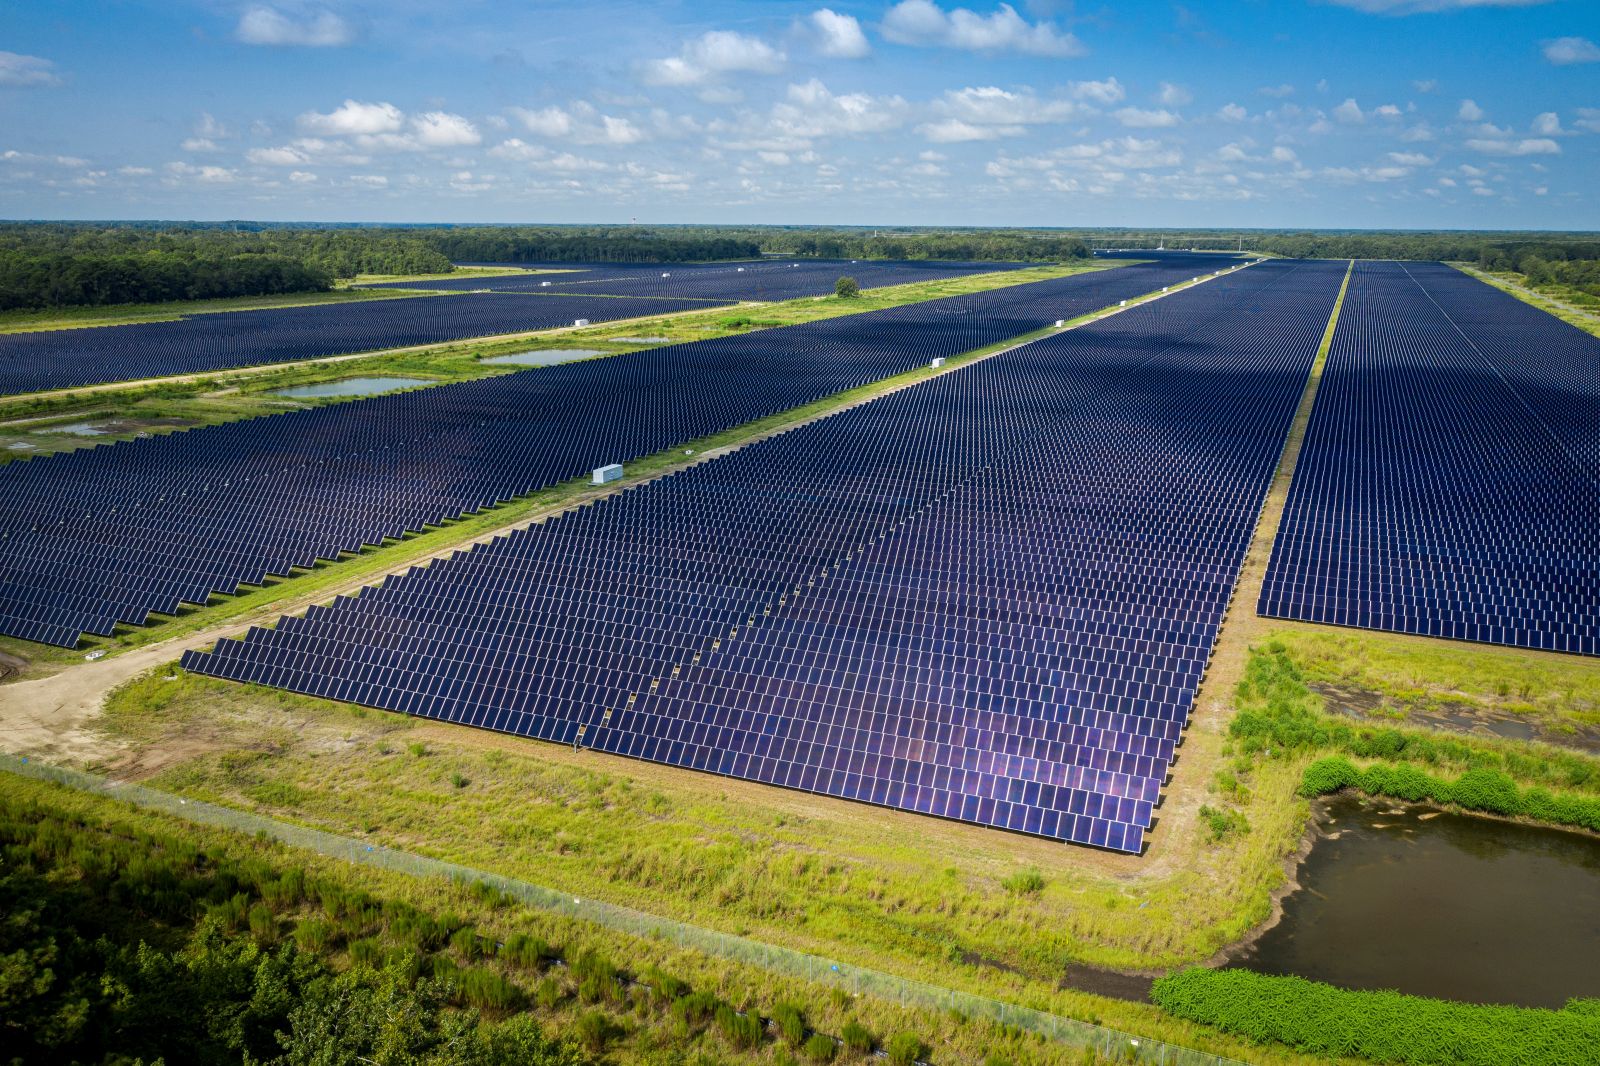 The Seabrook Solar Farm in Beaufort is a 72-megawatt solar production facility owned by Dominion Energy. (Photo/Provided)